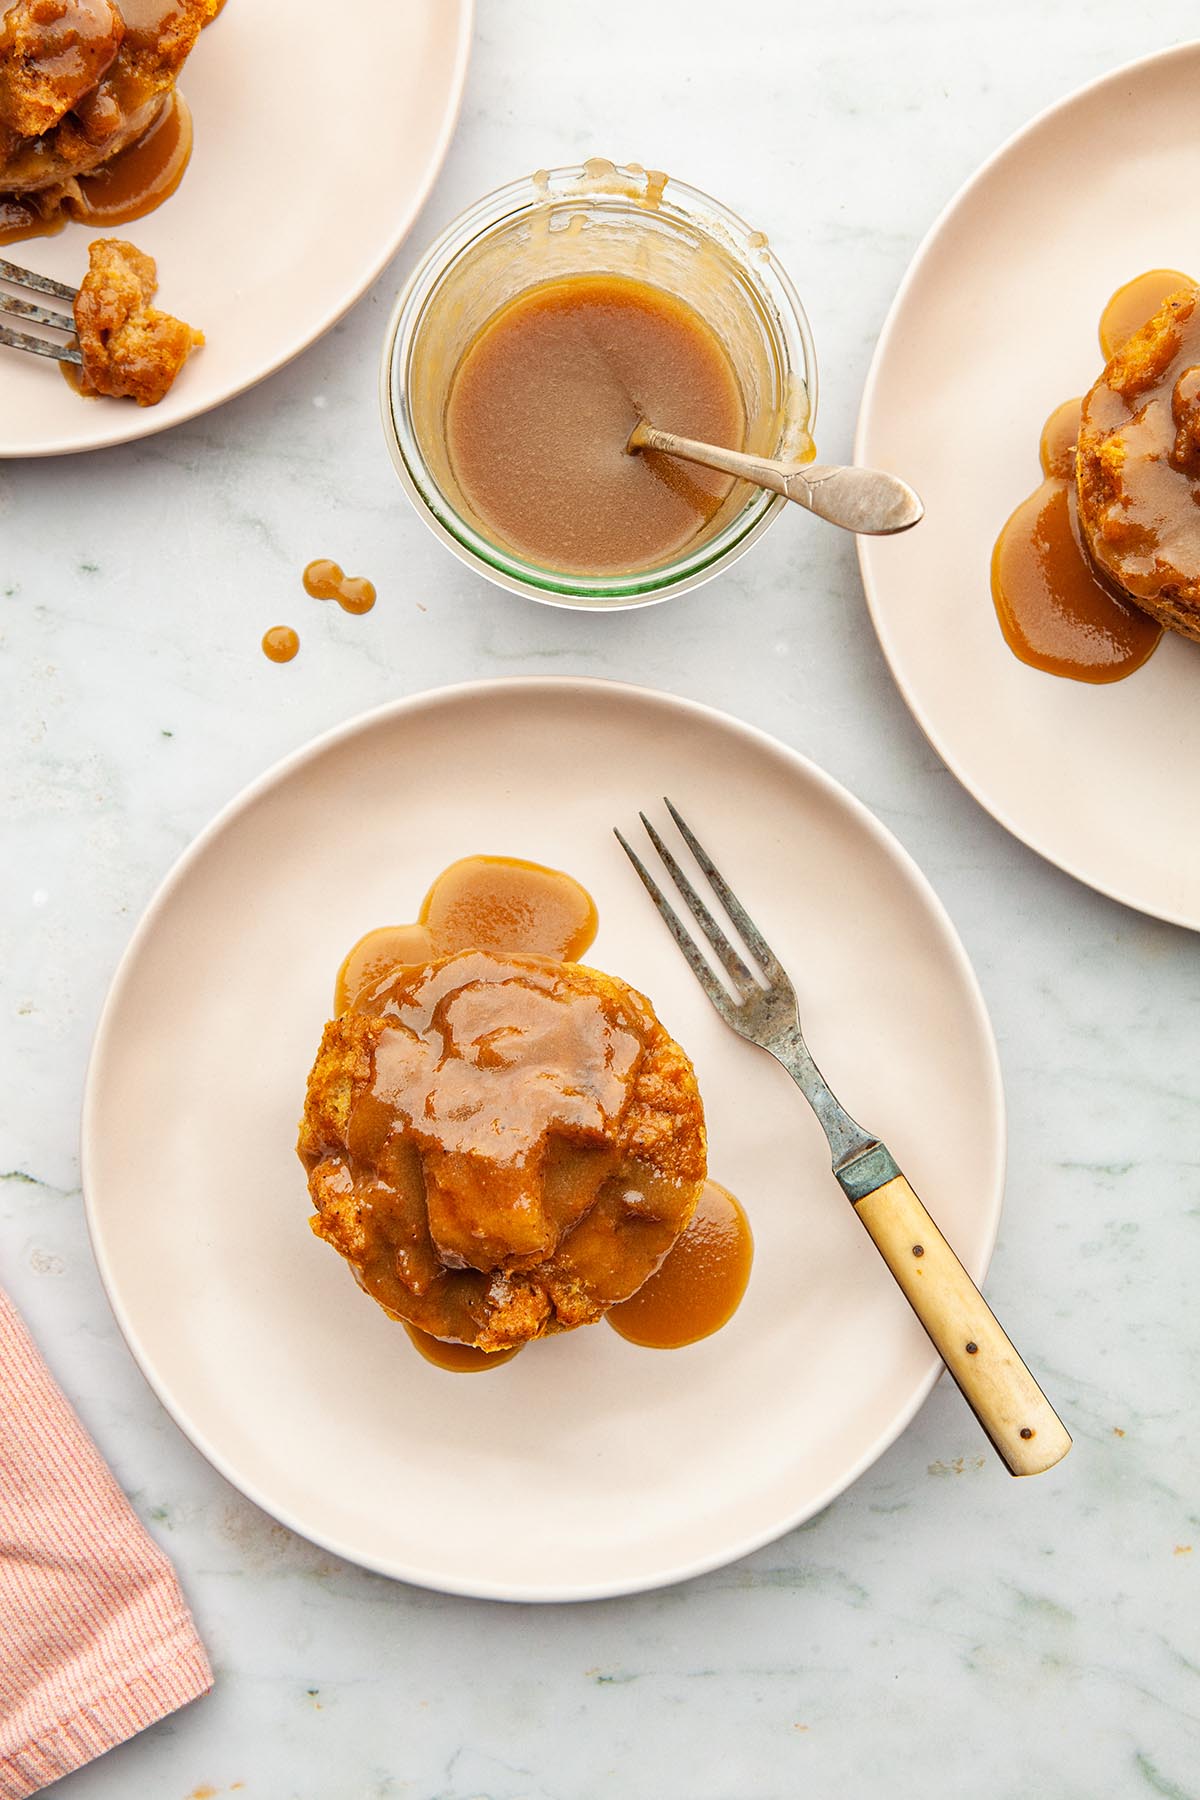 Three servings of pumpkin bread pudding on plates, topped with butterscotch sauce.